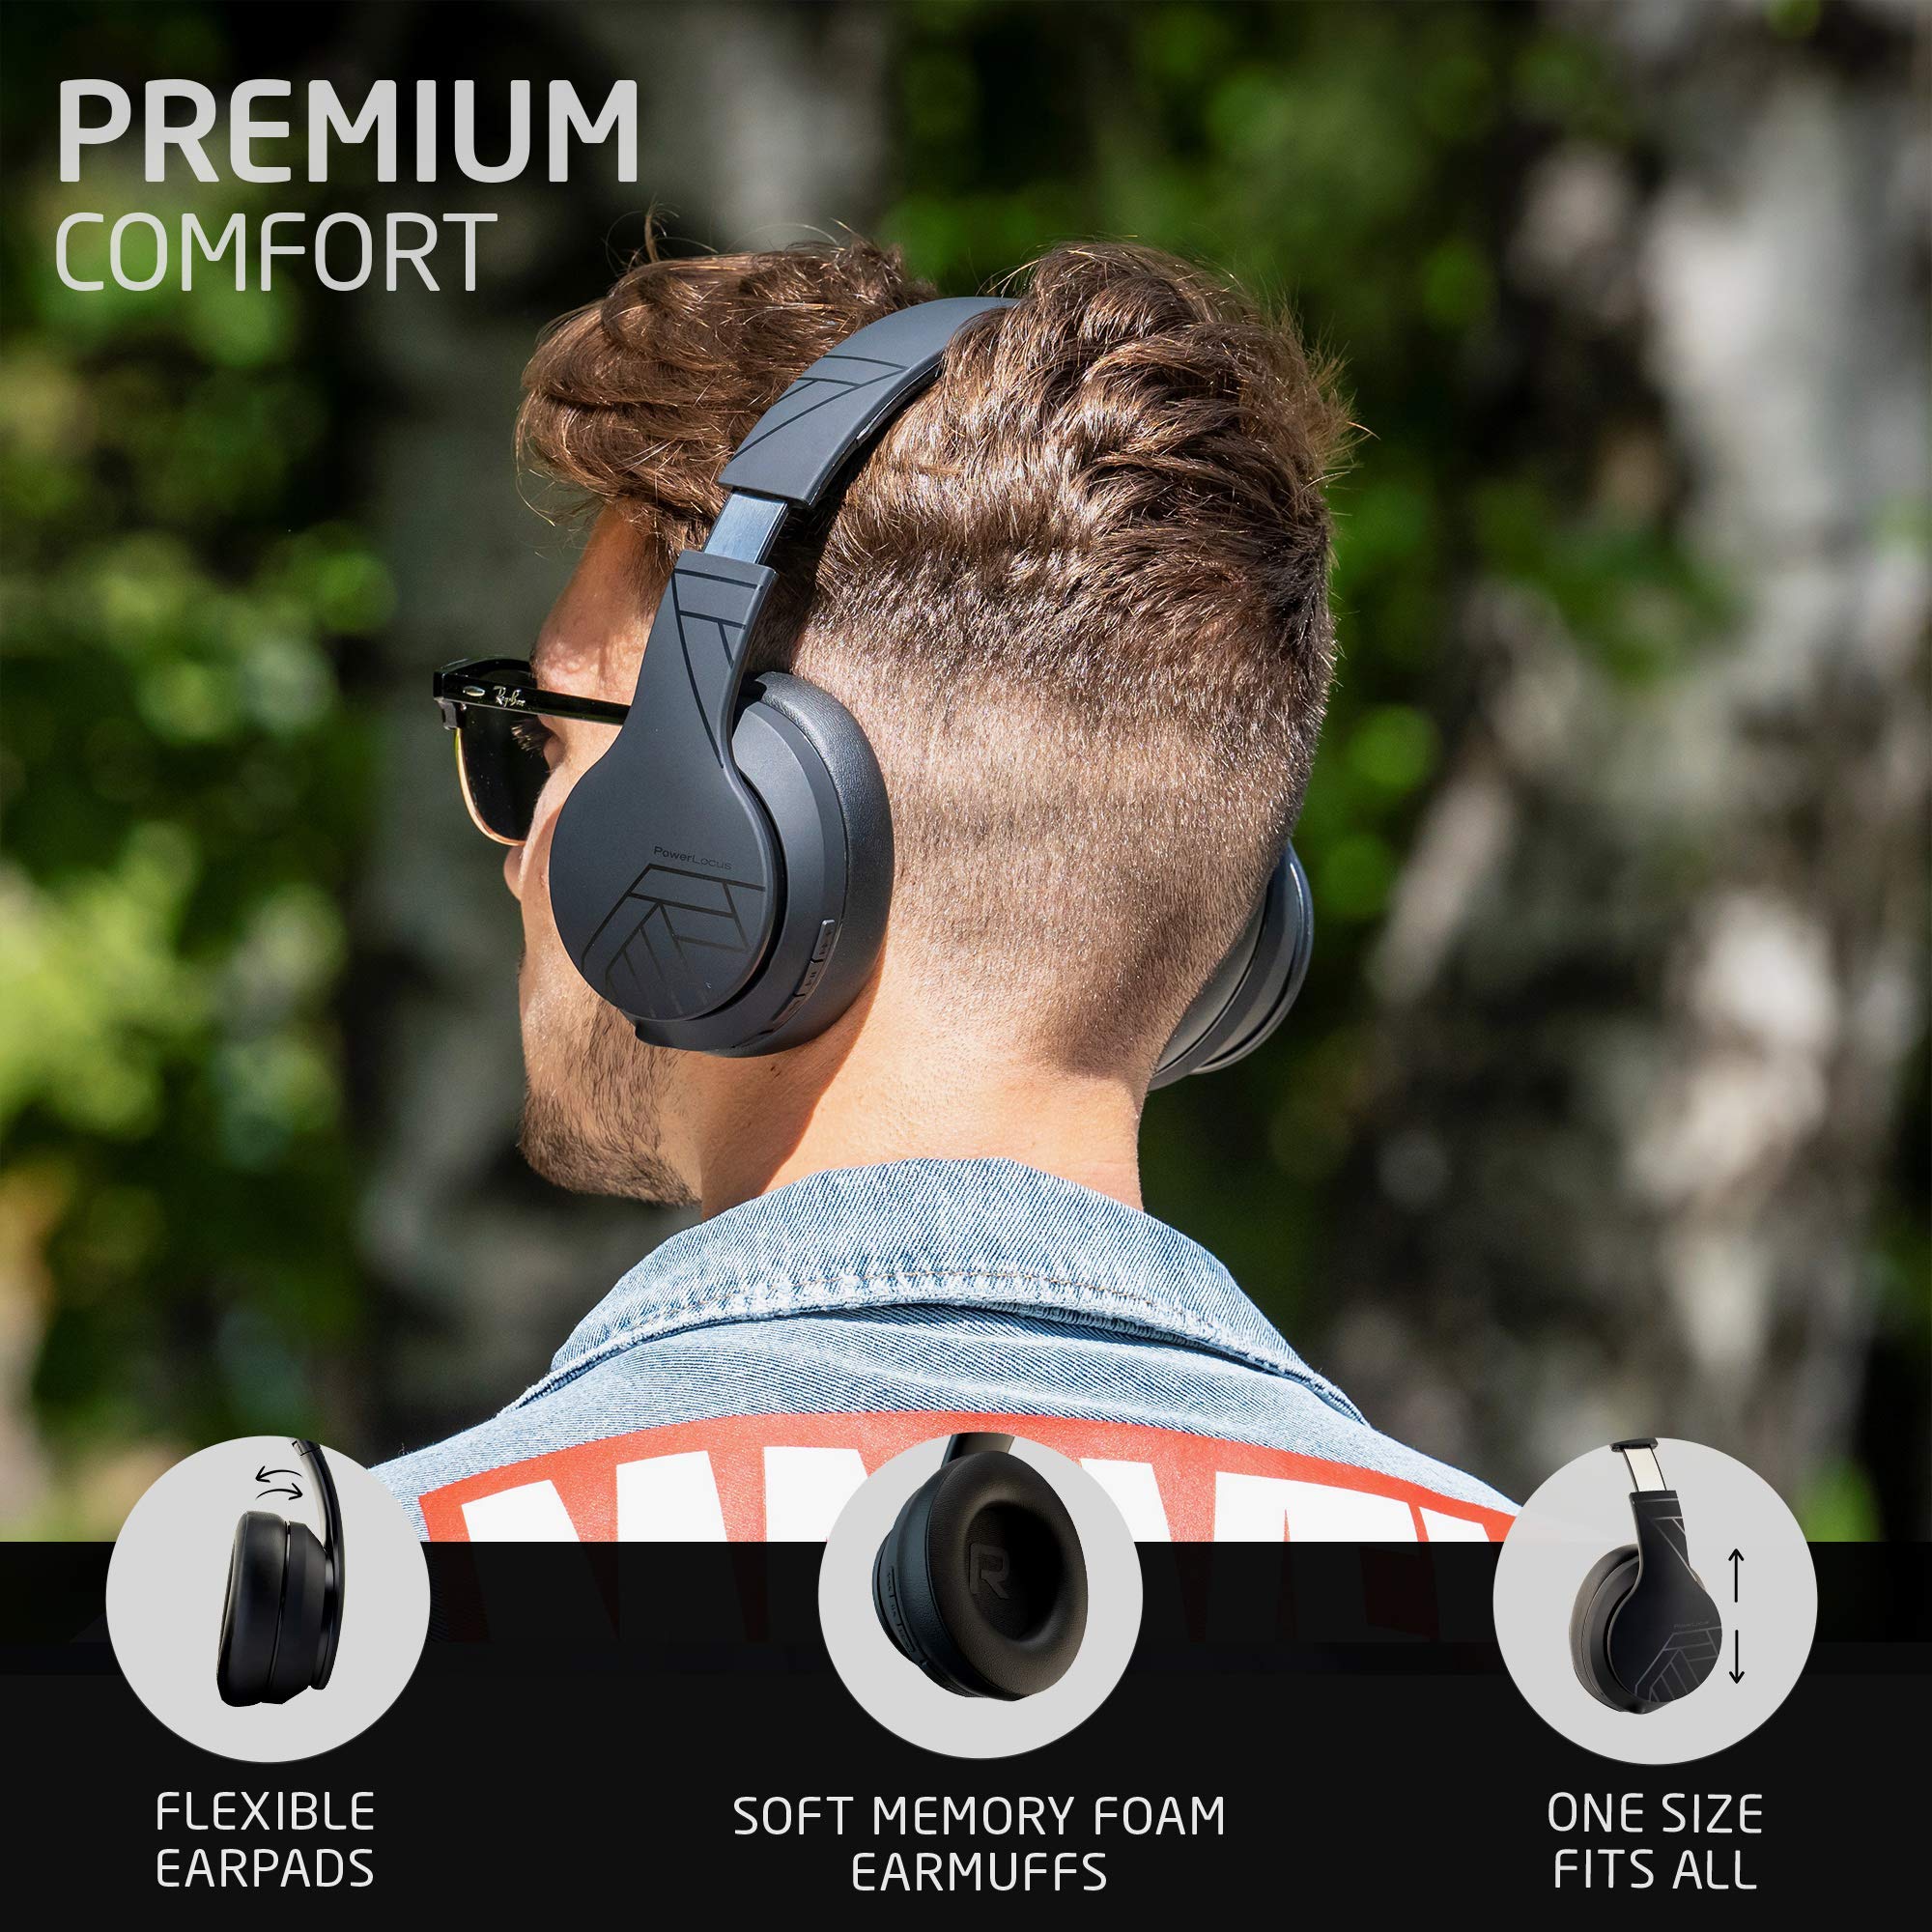 PowerLocus P6 Bluetooth Headphones Over Ear, Wireless Headphones, Super Bass Hi-Fi Stereo Sound, 20Hrs Battery Life,Soft Earmuffs, Headphones with Mic, Voice Assistant for iPhone,Android,Laptops,PC,TV